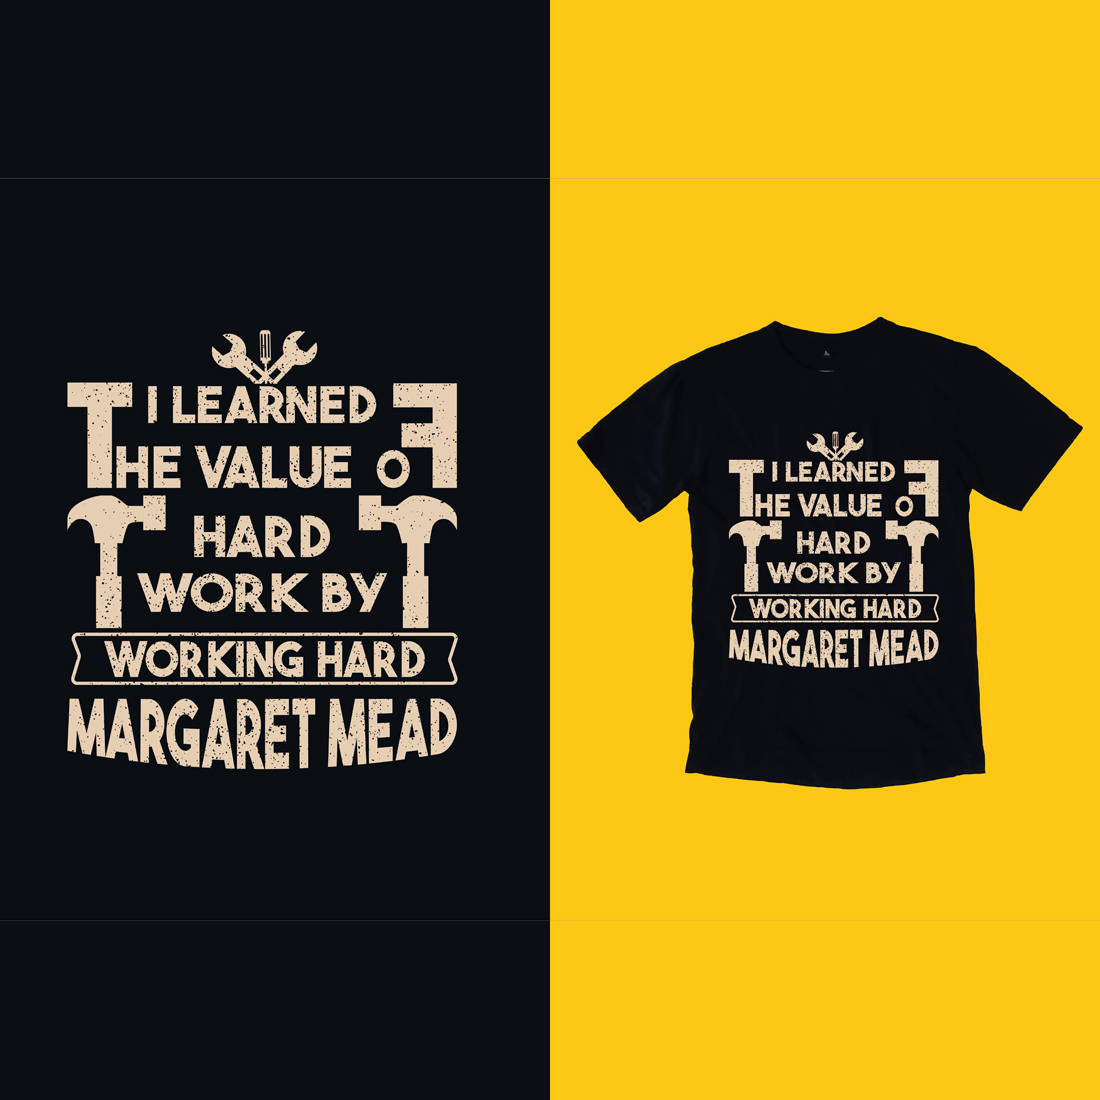 T - shirt that says i learned the value of hard work by working hard.